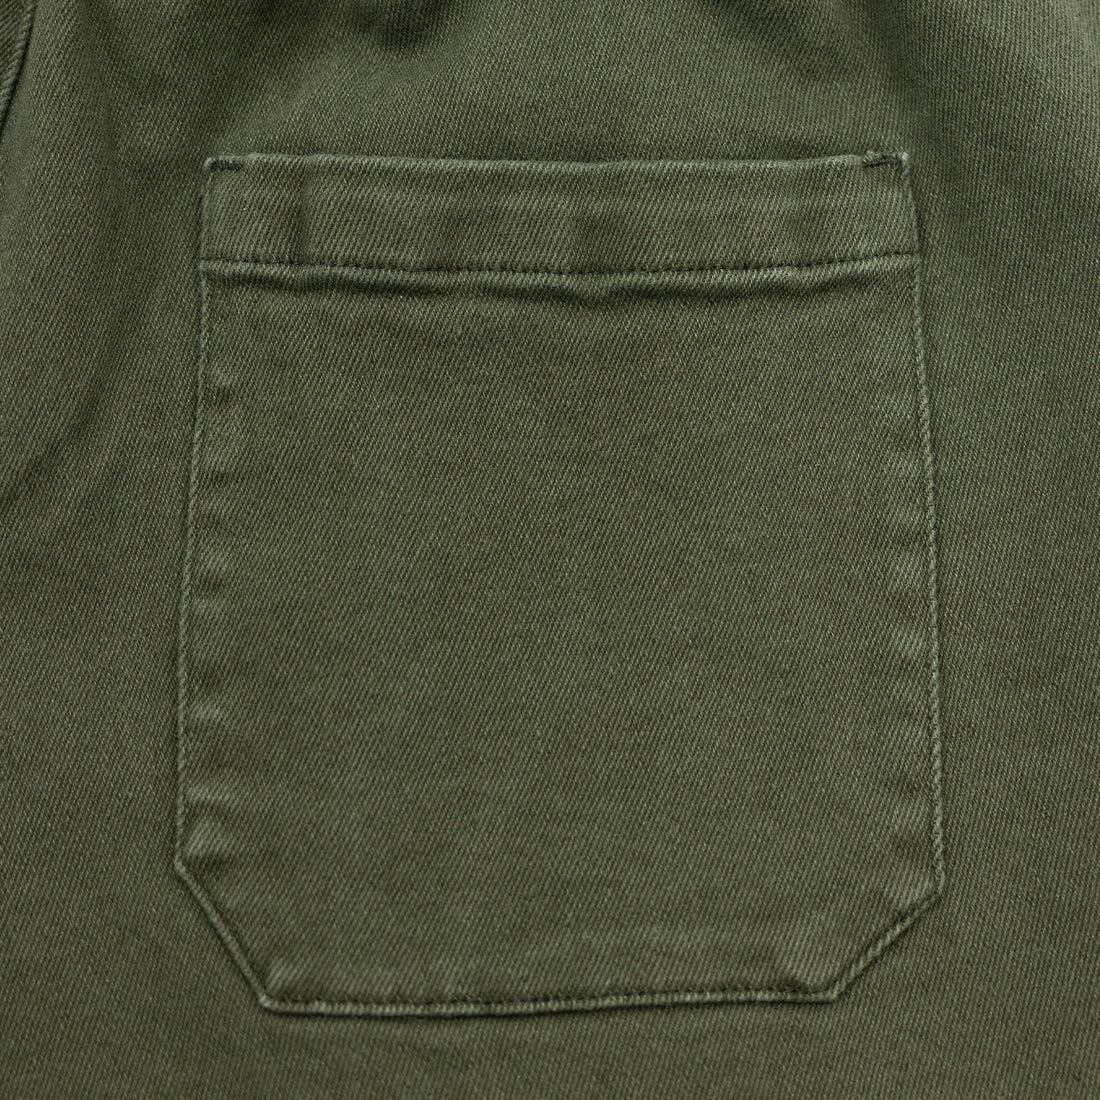 5" Washed Gym Shorts in Olive Green